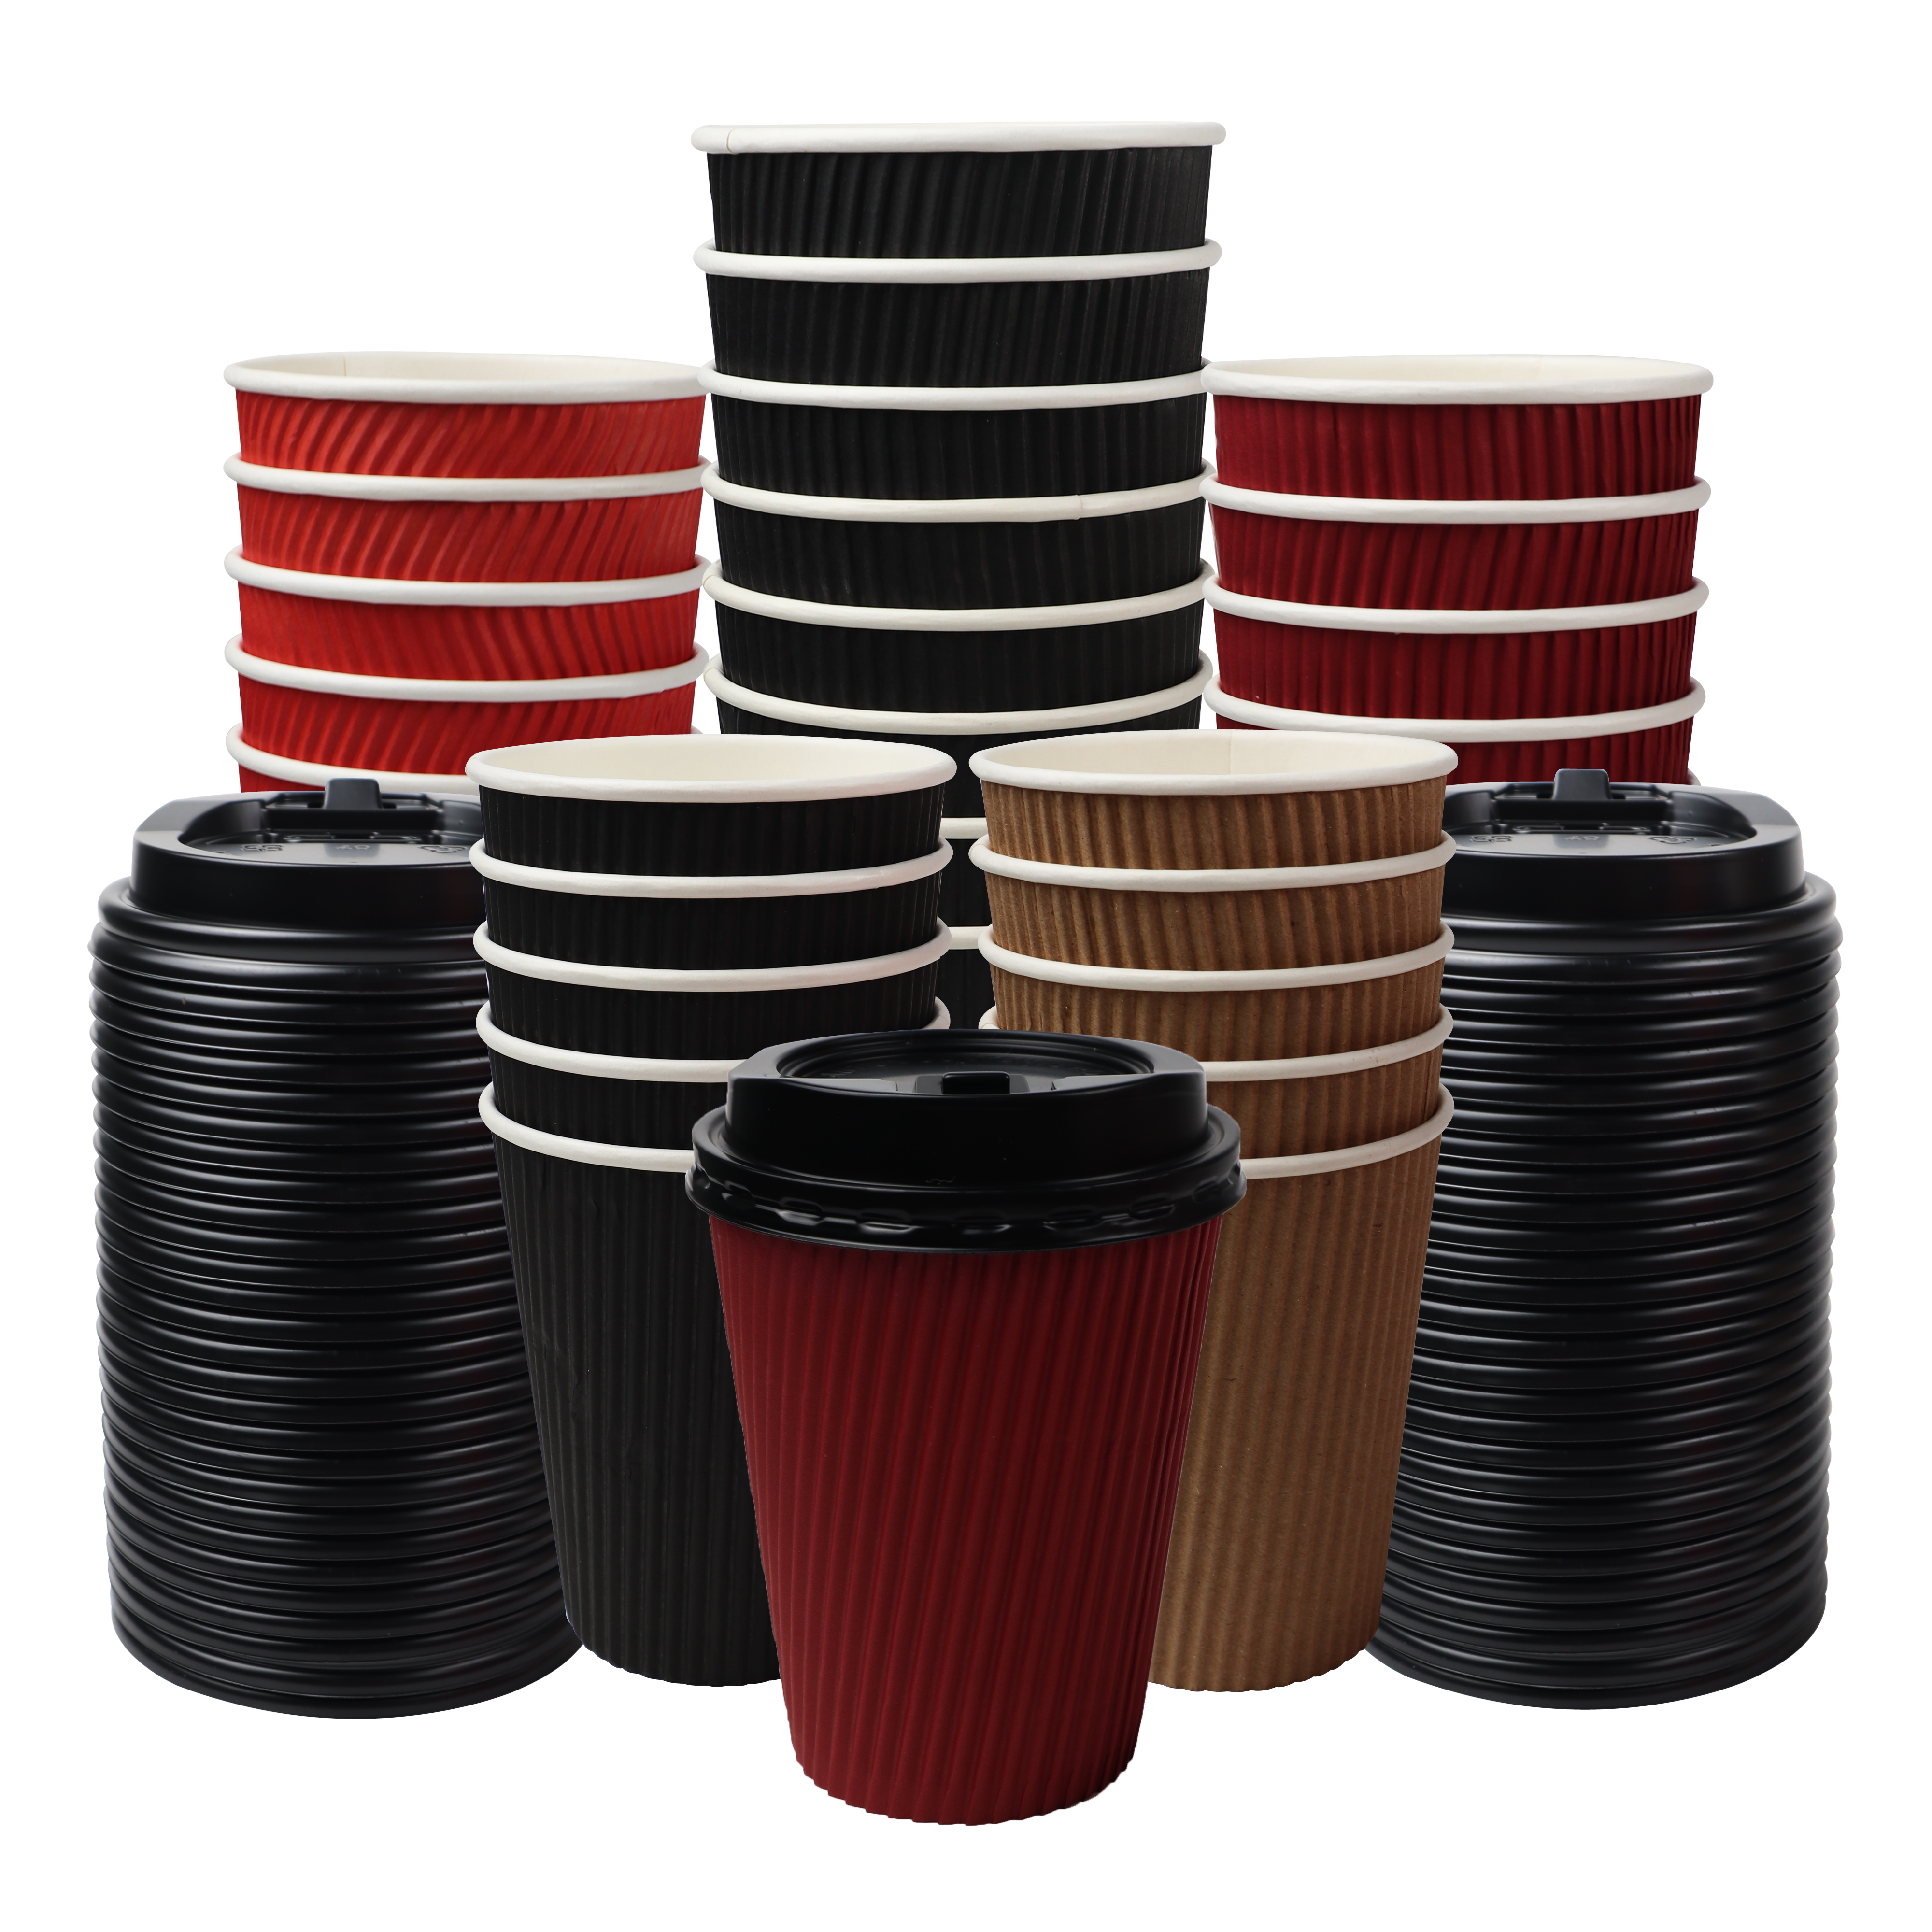 Customized Disposable Ripple Cup For Coffee Drink